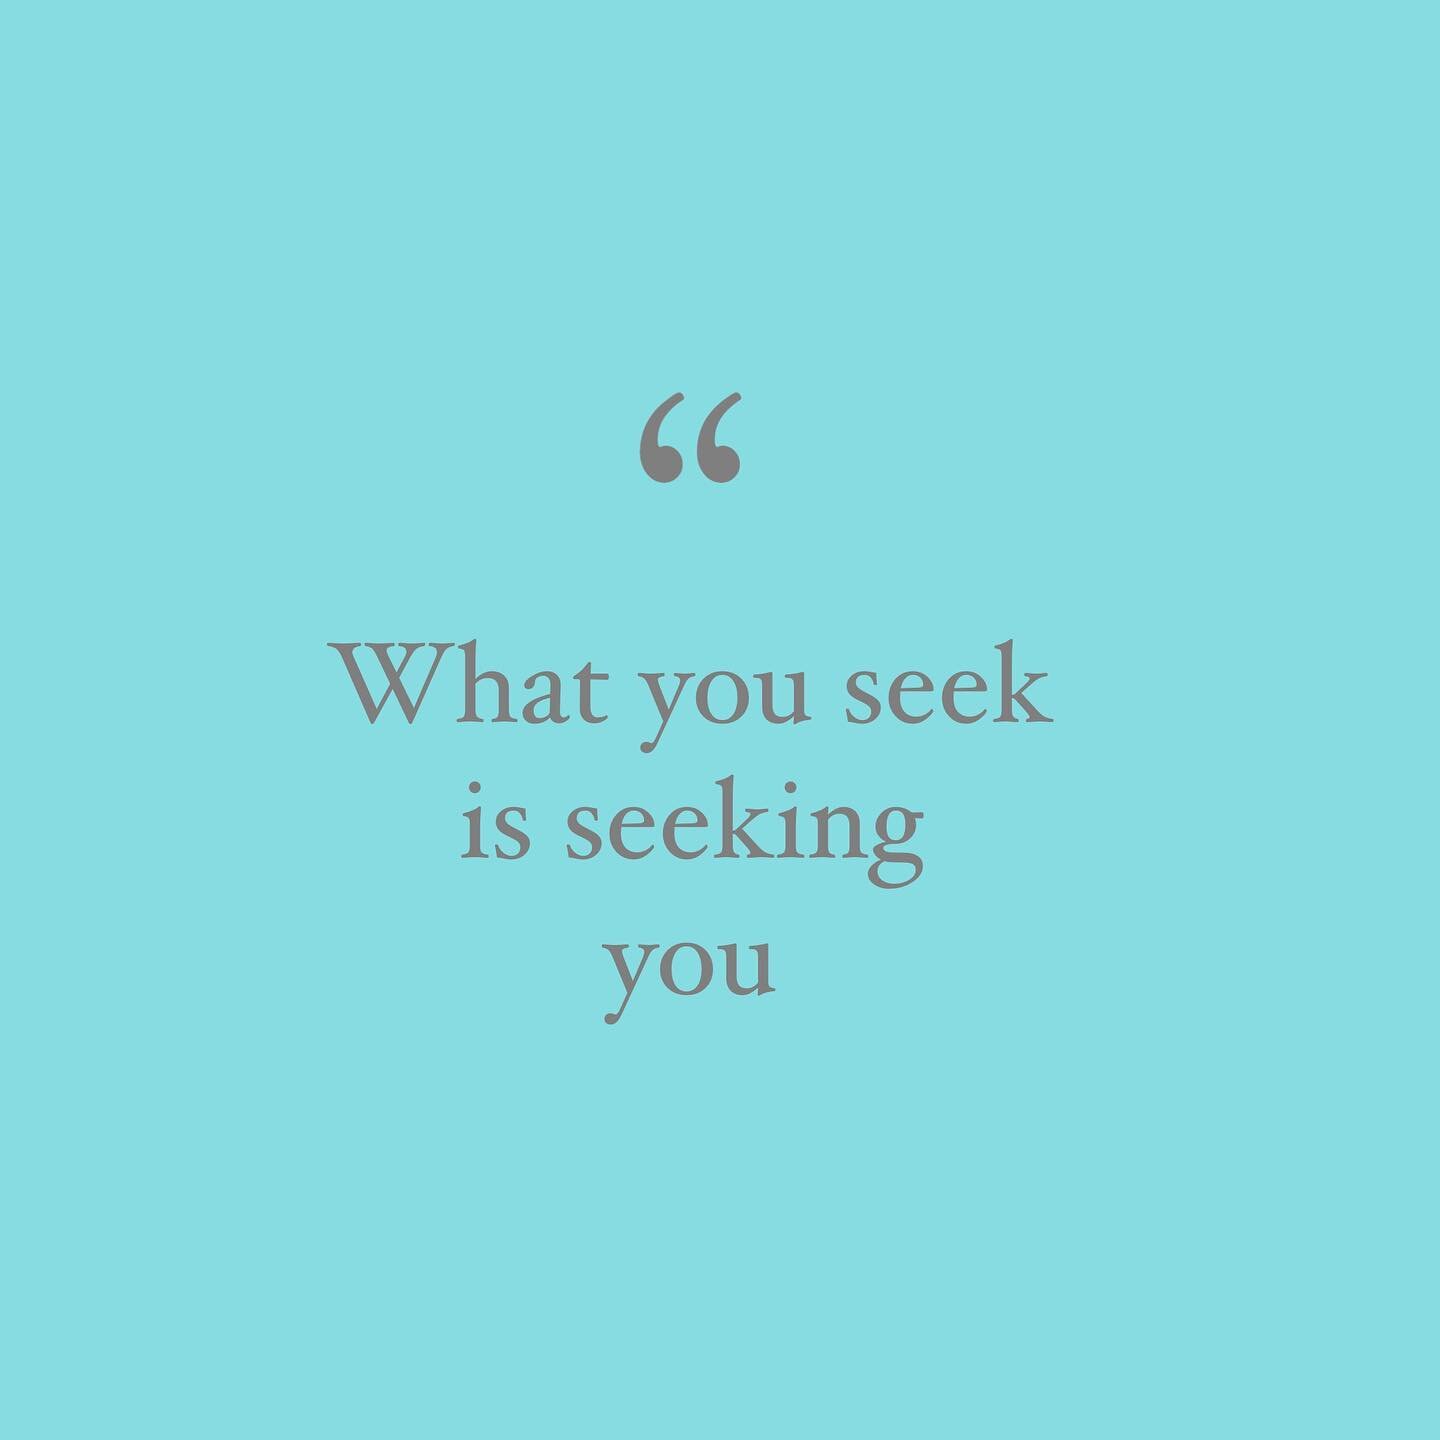 What you seek is seeking you. ~ Rumi

The law of attraction - your thoughts and intentions draw positive or negative things your way.

Alternatively, in the Sufi tradition, finding what you want begins with knowing yourself.

The goal of each person 